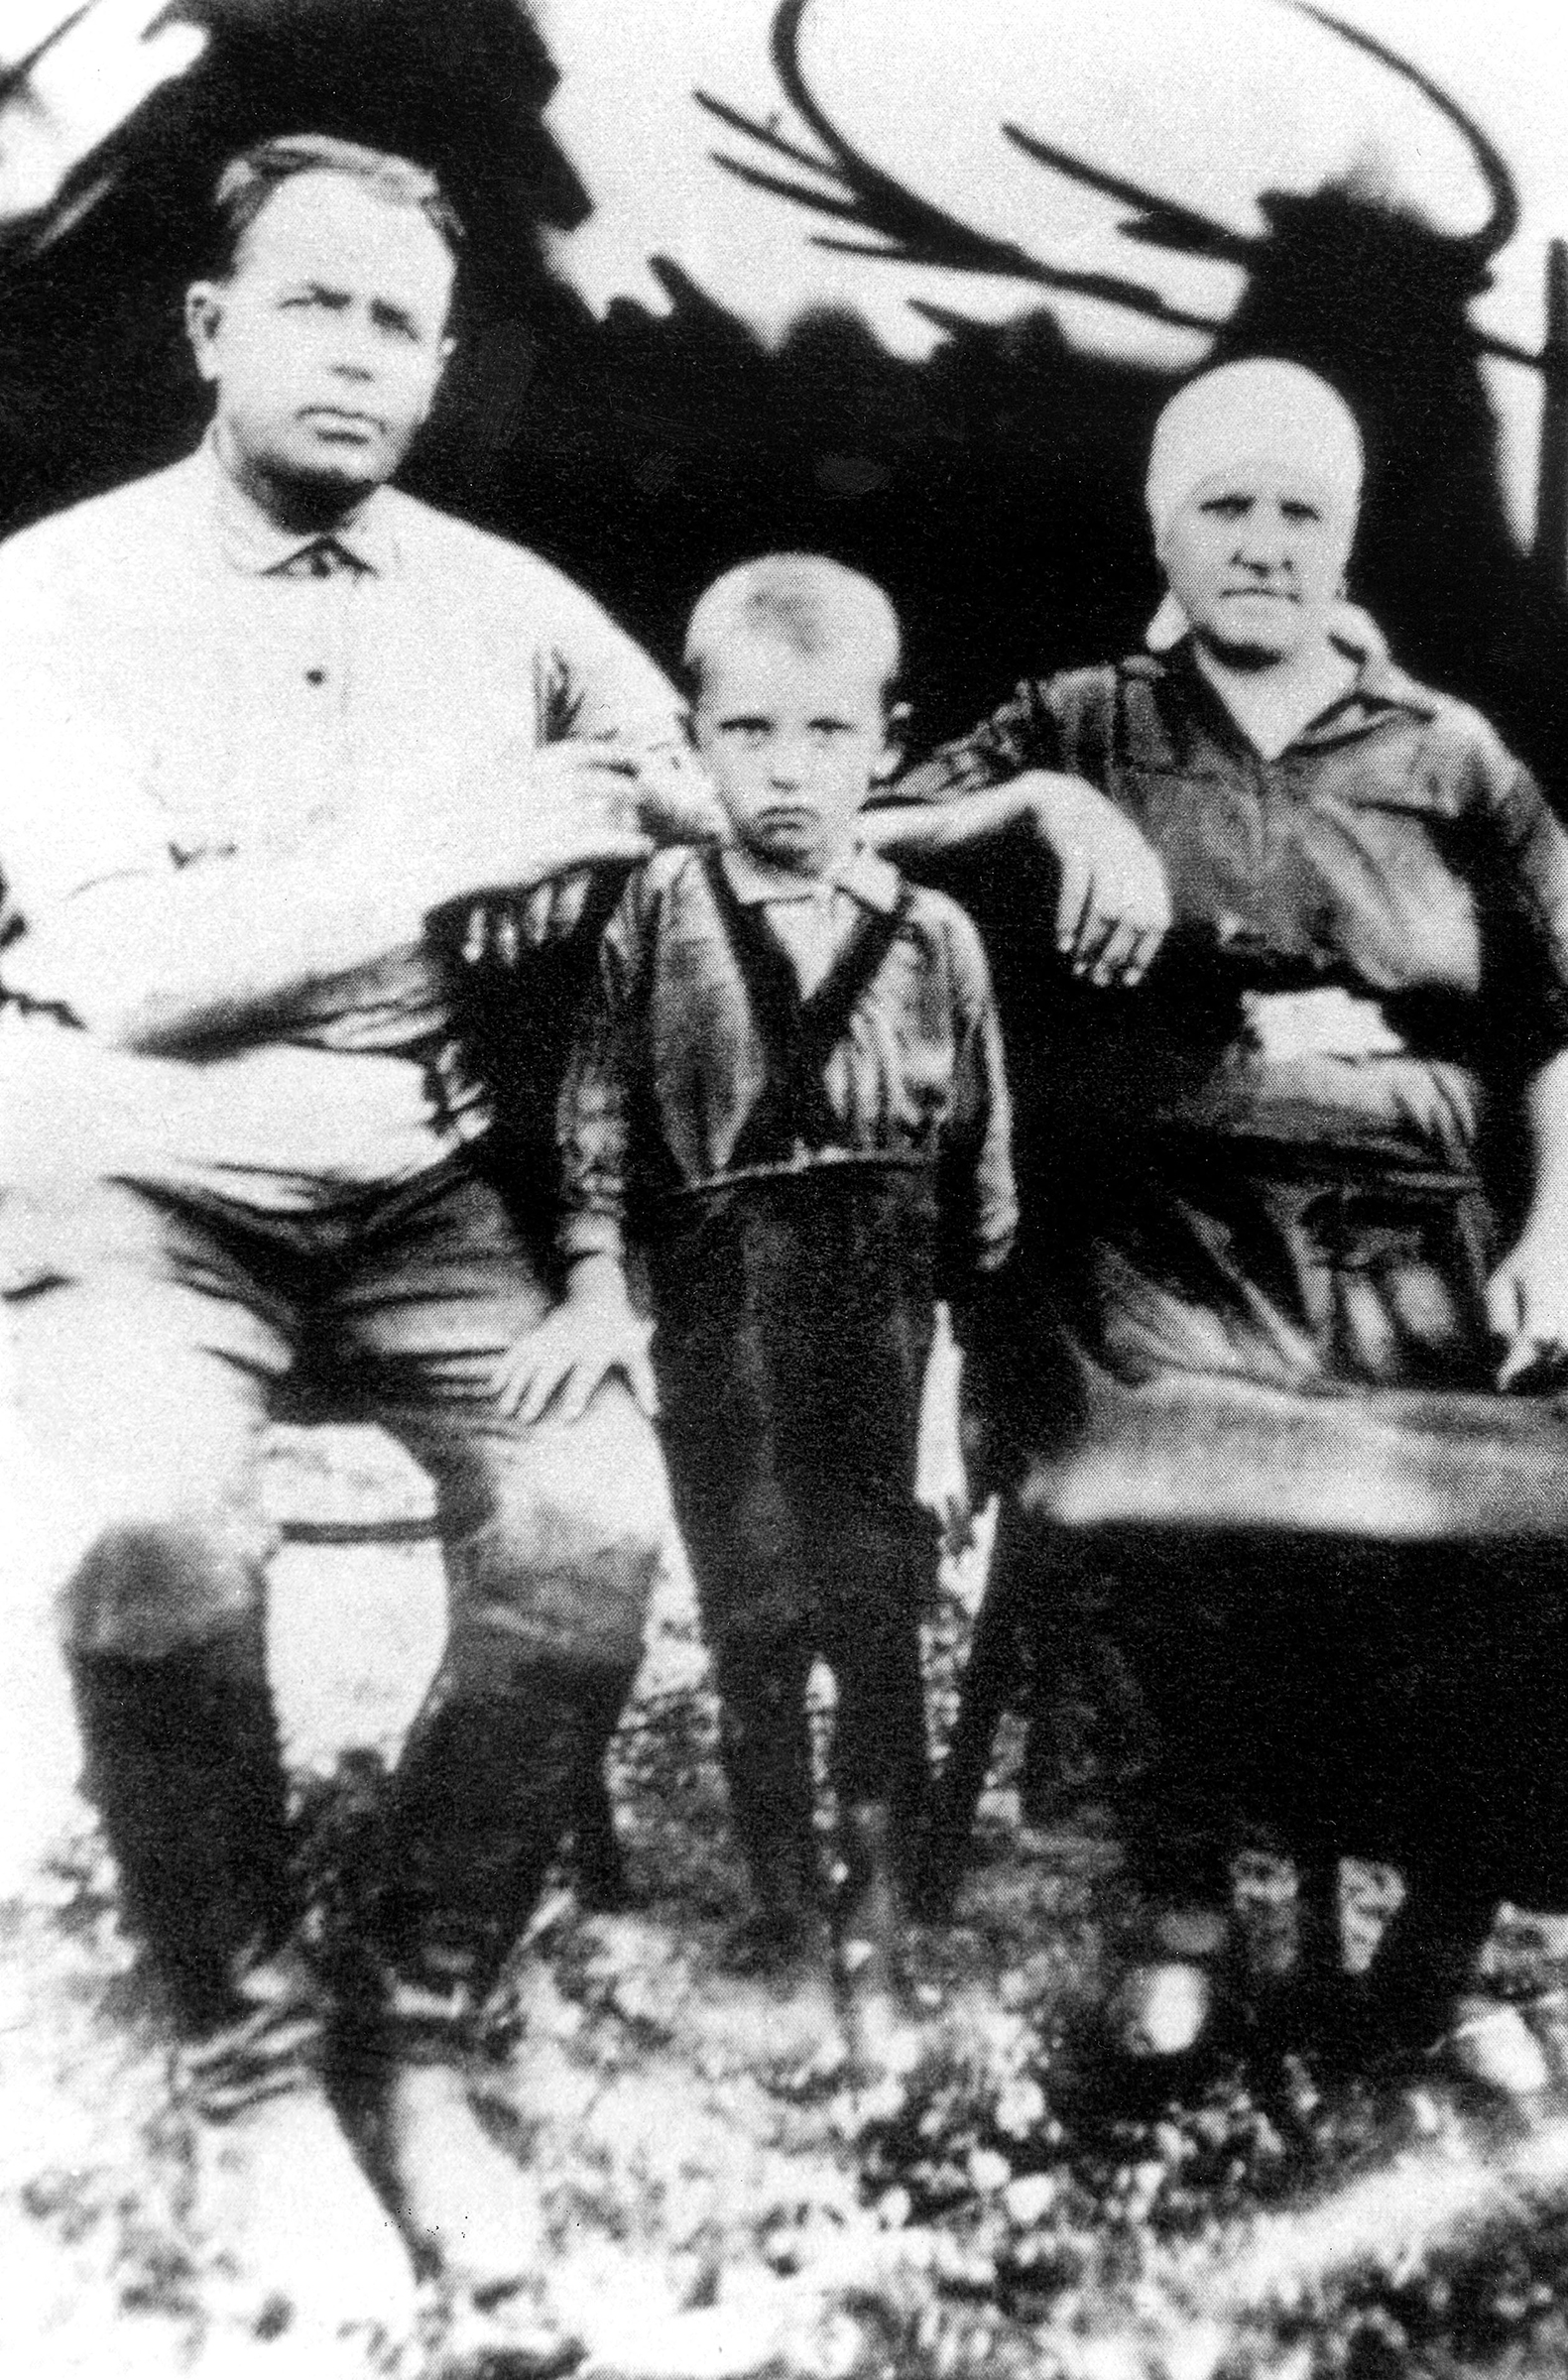 4-year old Mikhail Gorbatchev, here as a child in Privolnoe in Ukraine, circa. 1935. (Apic—Getty Images)